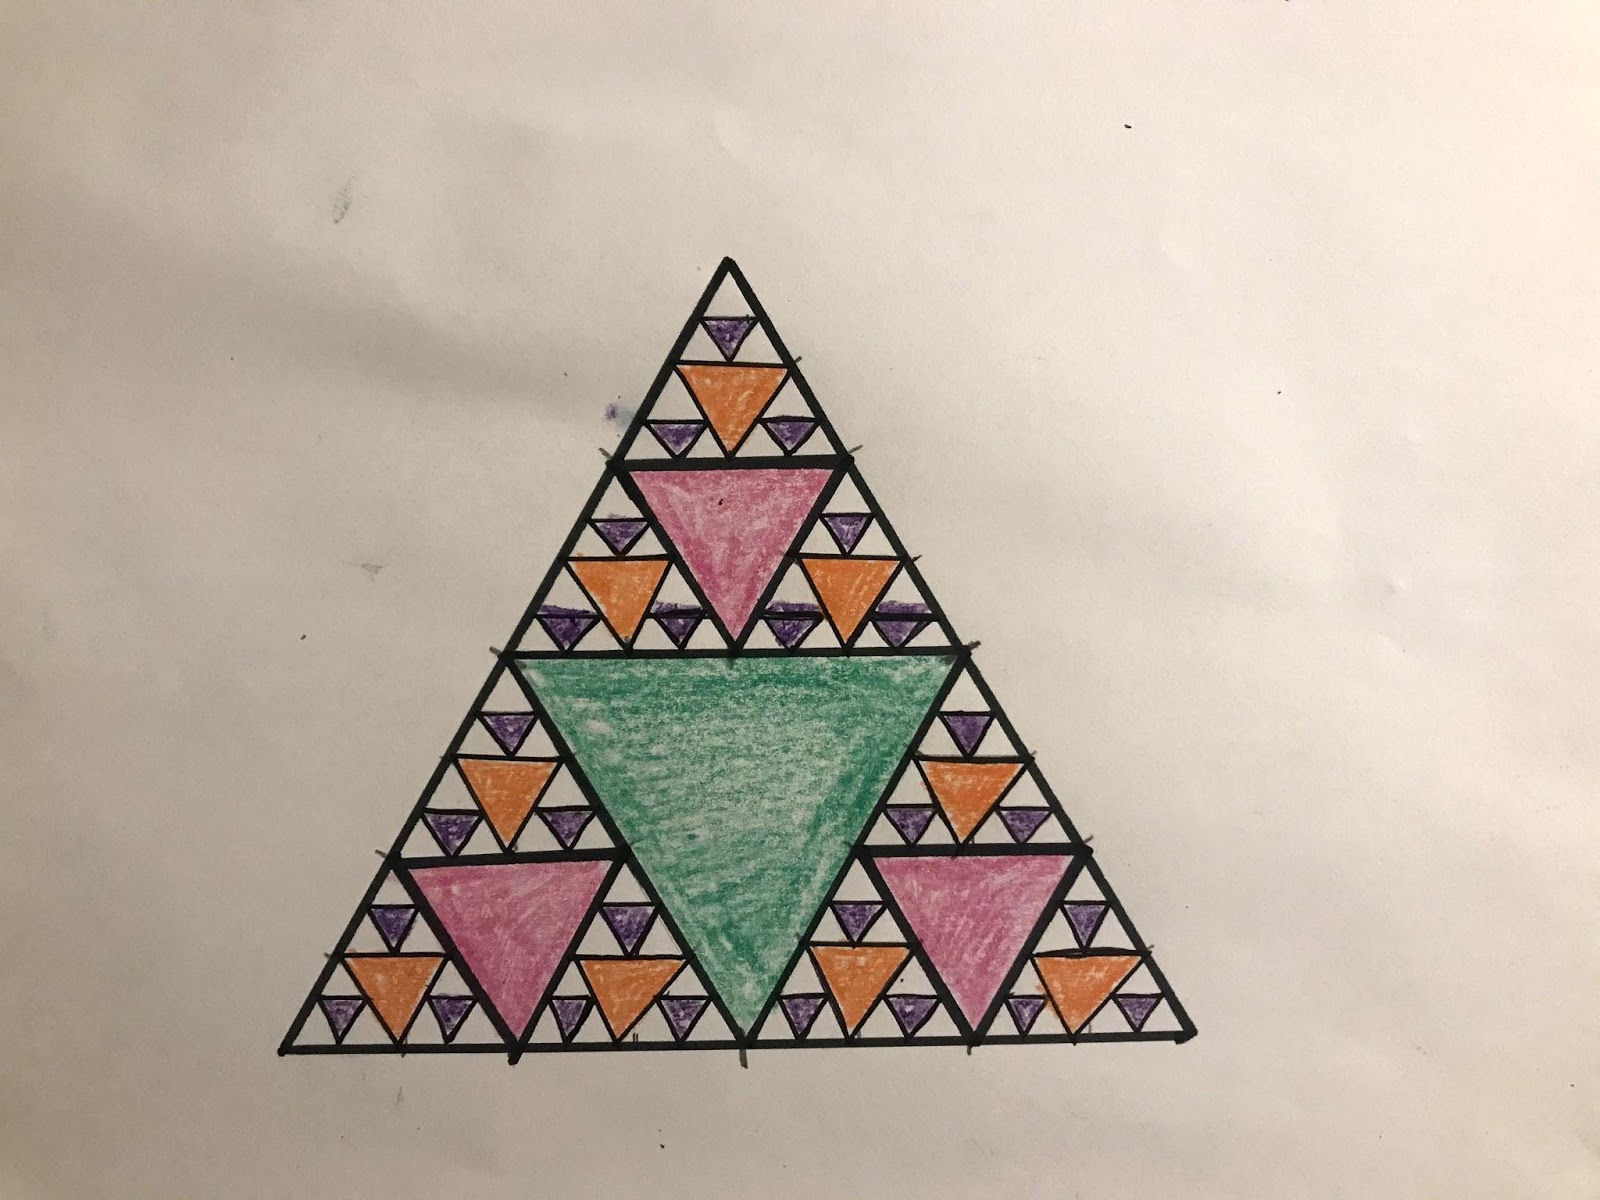 A completed Sierpinski Triangle containing a large green triangle, three medium pink triangles, nine small orange triangles, and twenty-seven tiny purple triangles.